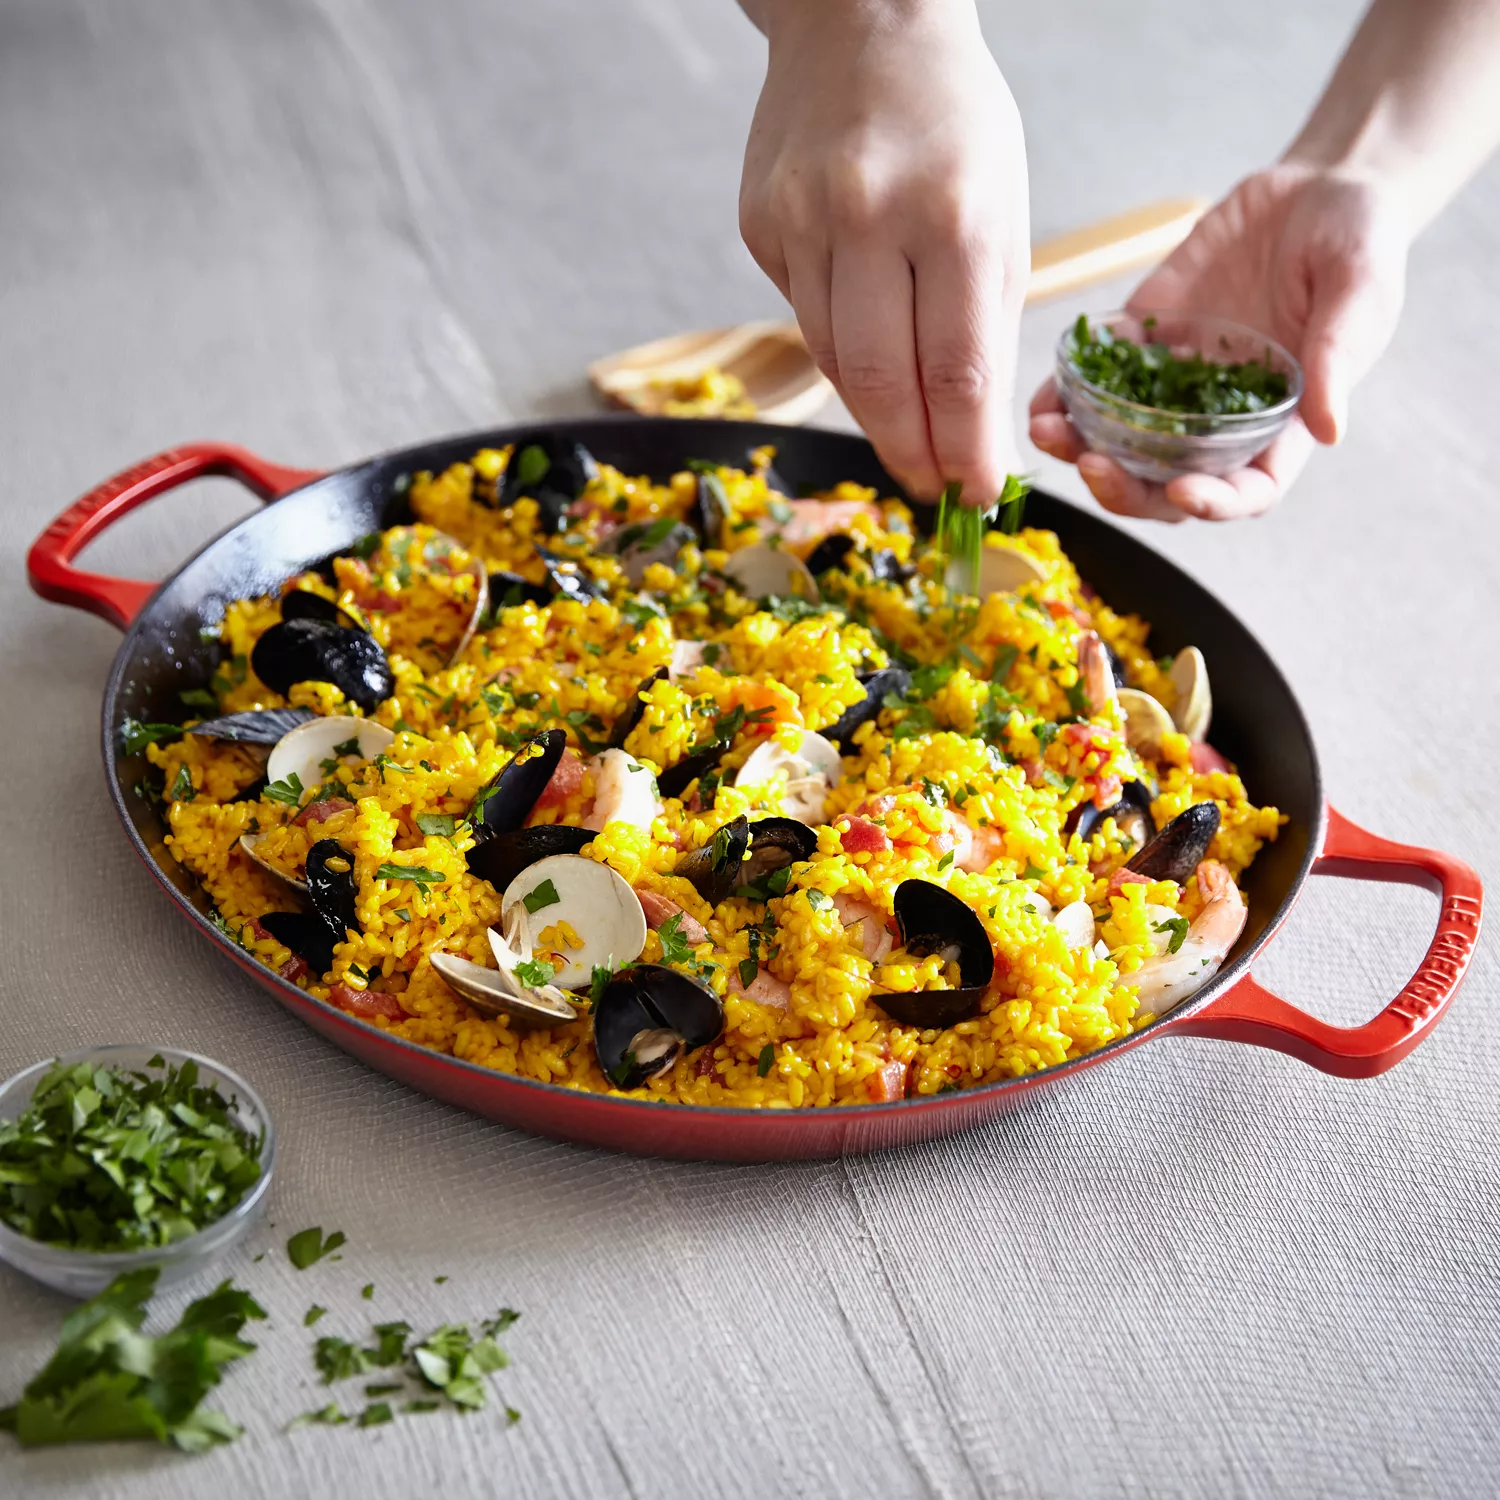 Shop Mini Paella Kit with Pan in Gift Box Online